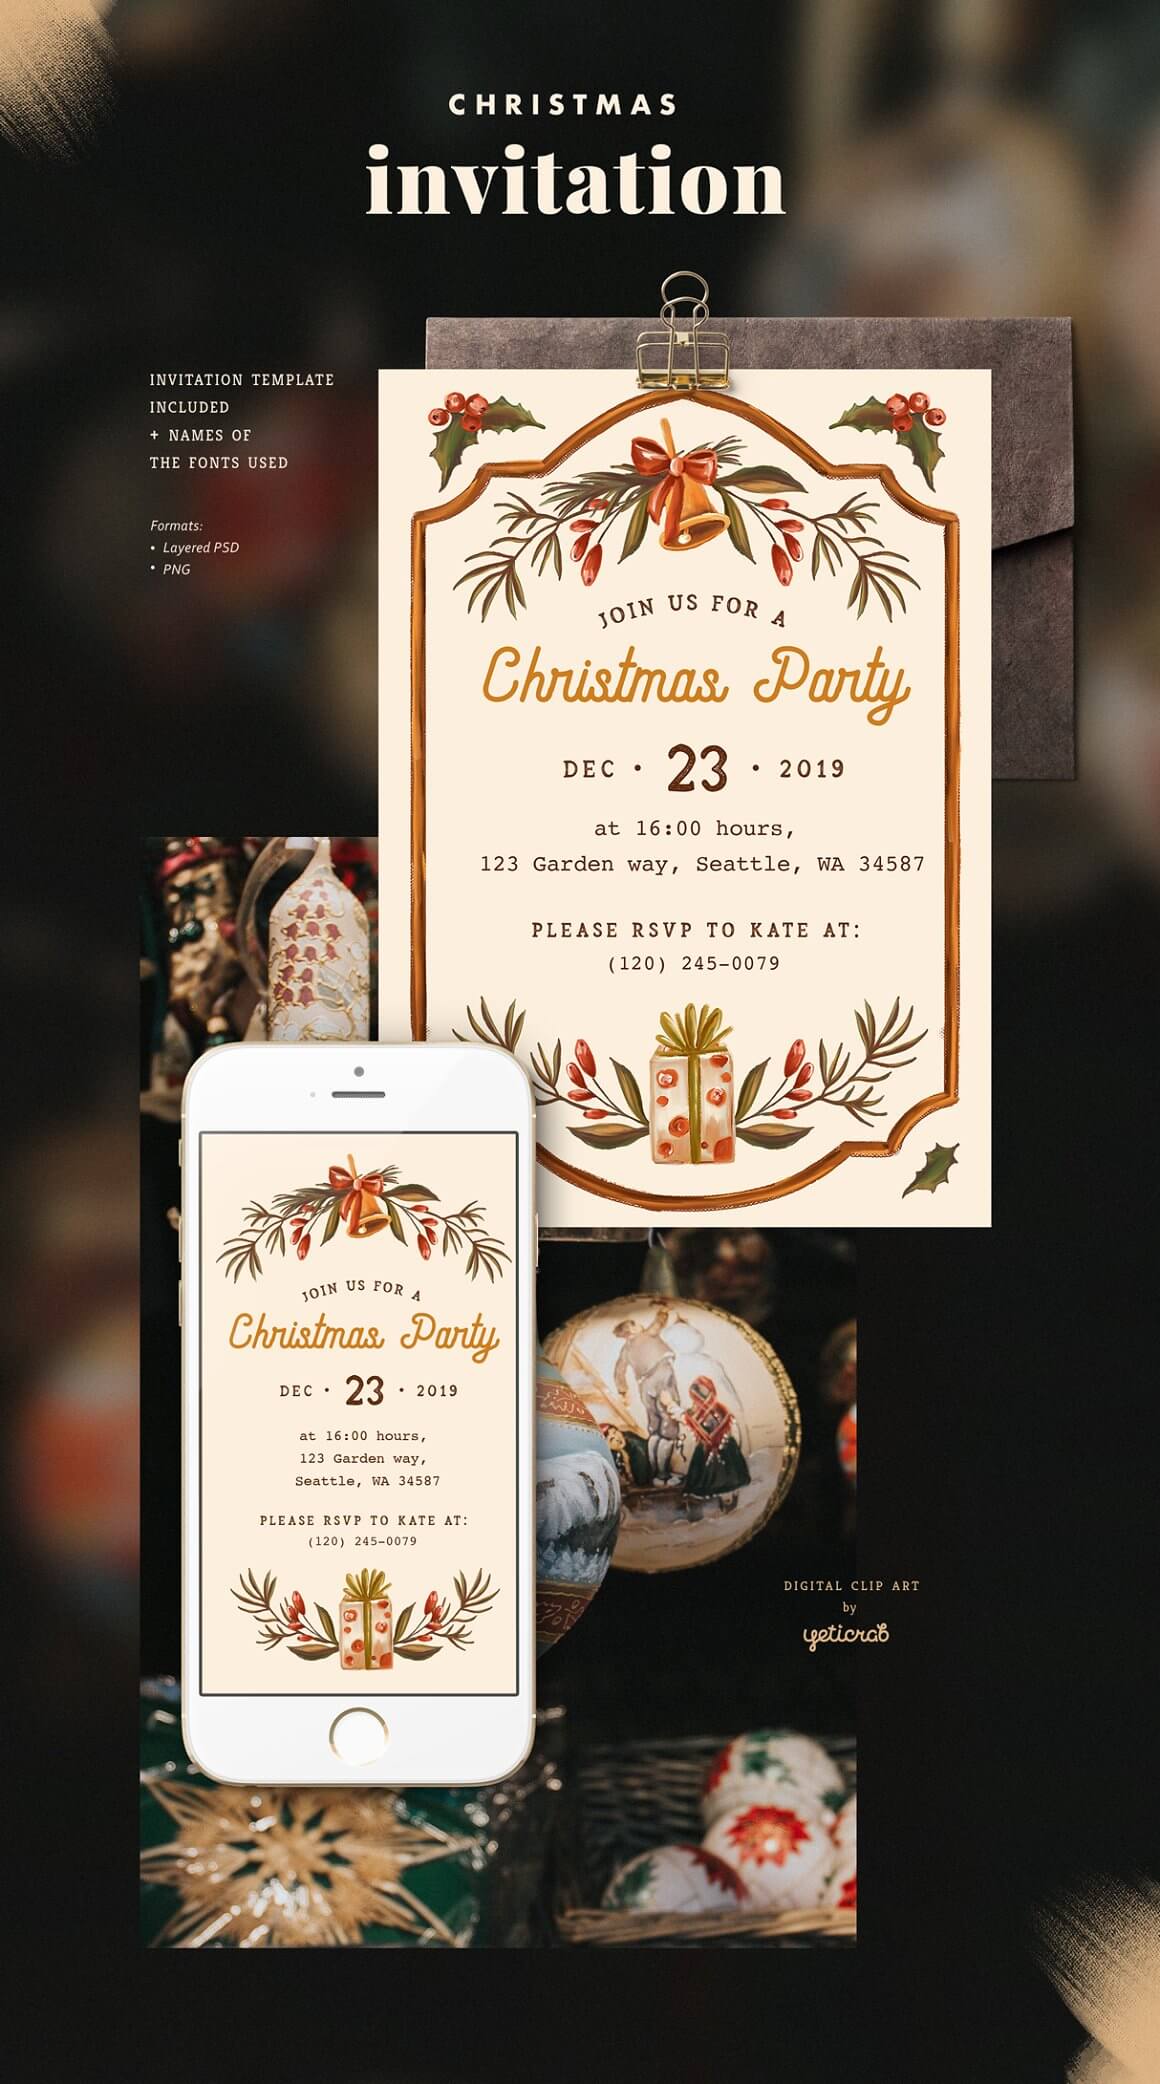 Christmas invitations on paper and on the phone screen.